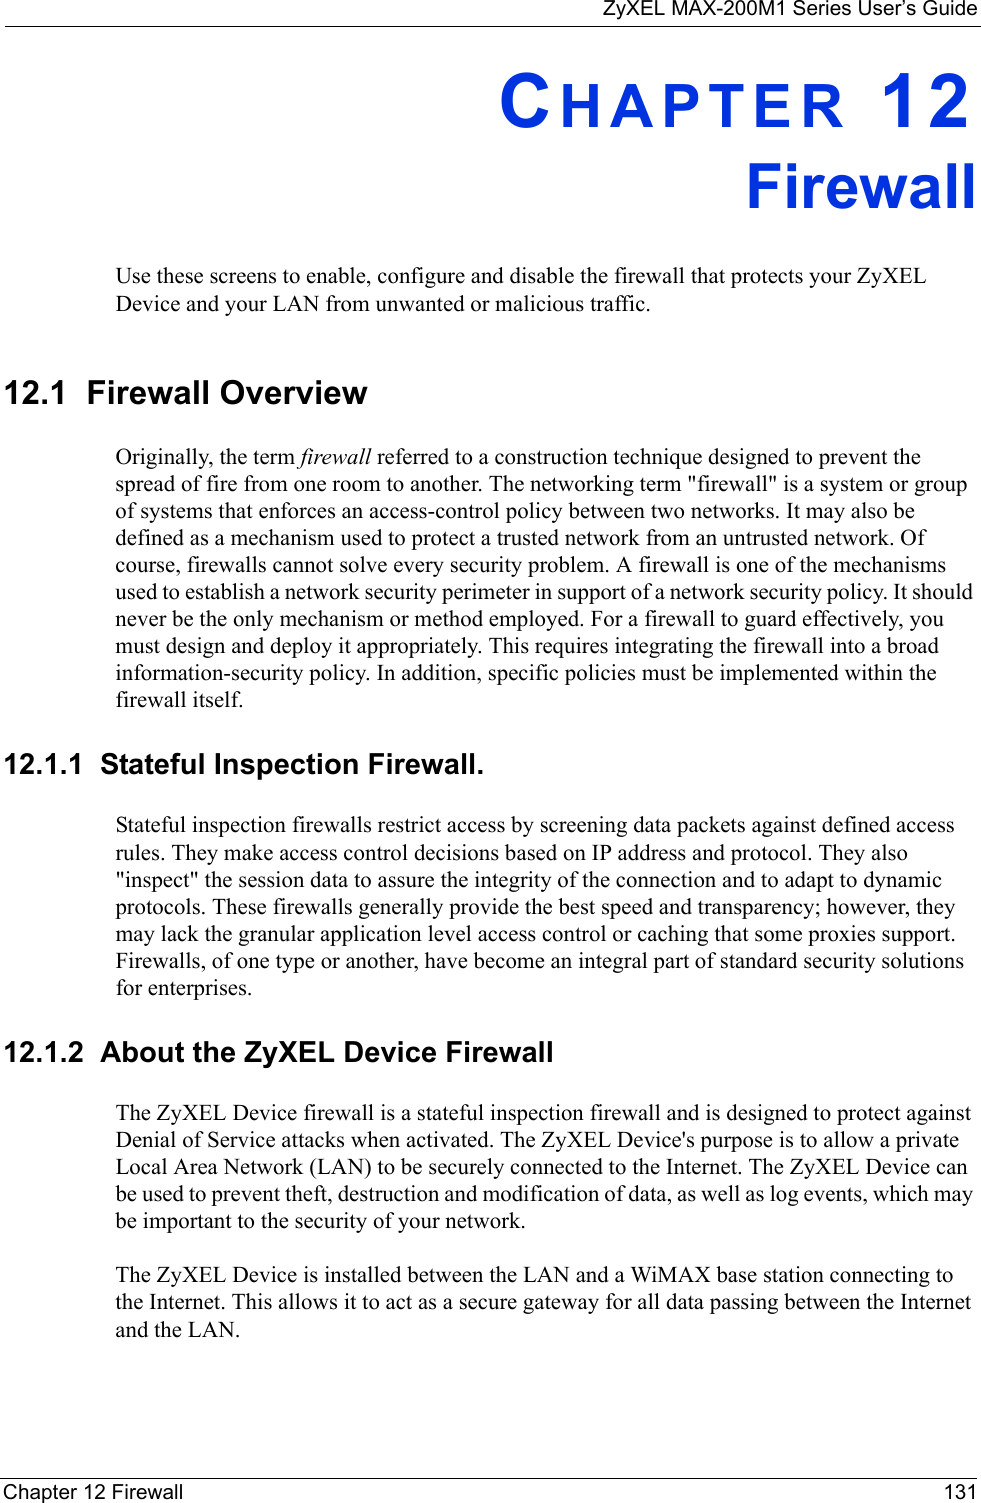 ZyXEL MAX-200M1 Series User’s GuideChapter 12 Firewall 131CHAPTER 12FirewallUse these screens to enable, configure and disable the firewall that protects your ZyXEL Device and your LAN from unwanted or malicious traffic.12.1  Firewall OverviewOriginally, the term firewall referred to a construction technique designed to prevent the spread of fire from one room to another. The networking term &quot;firewall&quot; is a system or group of systems that enforces an access-control policy between two networks. It may also be defined as a mechanism used to protect a trusted network from an untrusted network. Of course, firewalls cannot solve every security problem. A firewall is one of the mechanisms used to establish a network security perimeter in support of a network security policy. It should never be the only mechanism or method employed. For a firewall to guard effectively, you must design and deploy it appropriately. This requires integrating the firewall into a broad information-security policy. In addition, specific policies must be implemented within the firewall itself.12.1.1  Stateful Inspection Firewall. Stateful inspection firewalls restrict access by screening data packets against defined access rules. They make access control decisions based on IP address and protocol. They also &quot;inspect&quot; the session data to assure the integrity of the connection and to adapt to dynamic protocols. These firewalls generally provide the best speed and transparency; however, they may lack the granular application level access control or caching that some proxies support. Firewalls, of one type or another, have become an integral part of standard security solutions for enterprises.12.1.2  About the ZyXEL Device FirewallThe ZyXEL Device firewall is a stateful inspection firewall and is designed to protect against Denial of Service attacks when activated. The ZyXEL Device&apos;s purpose is to allow a private Local Area Network (LAN) to be securely connected to the Internet. The ZyXEL Device can be used to prevent theft, destruction and modification of data, as well as log events, which may be important to the security of your network. The ZyXEL Device is installed between the LAN and a WiMAX base station connecting to the Internet. This allows it to act as a secure gateway for all data passing between the Internet and the LAN.